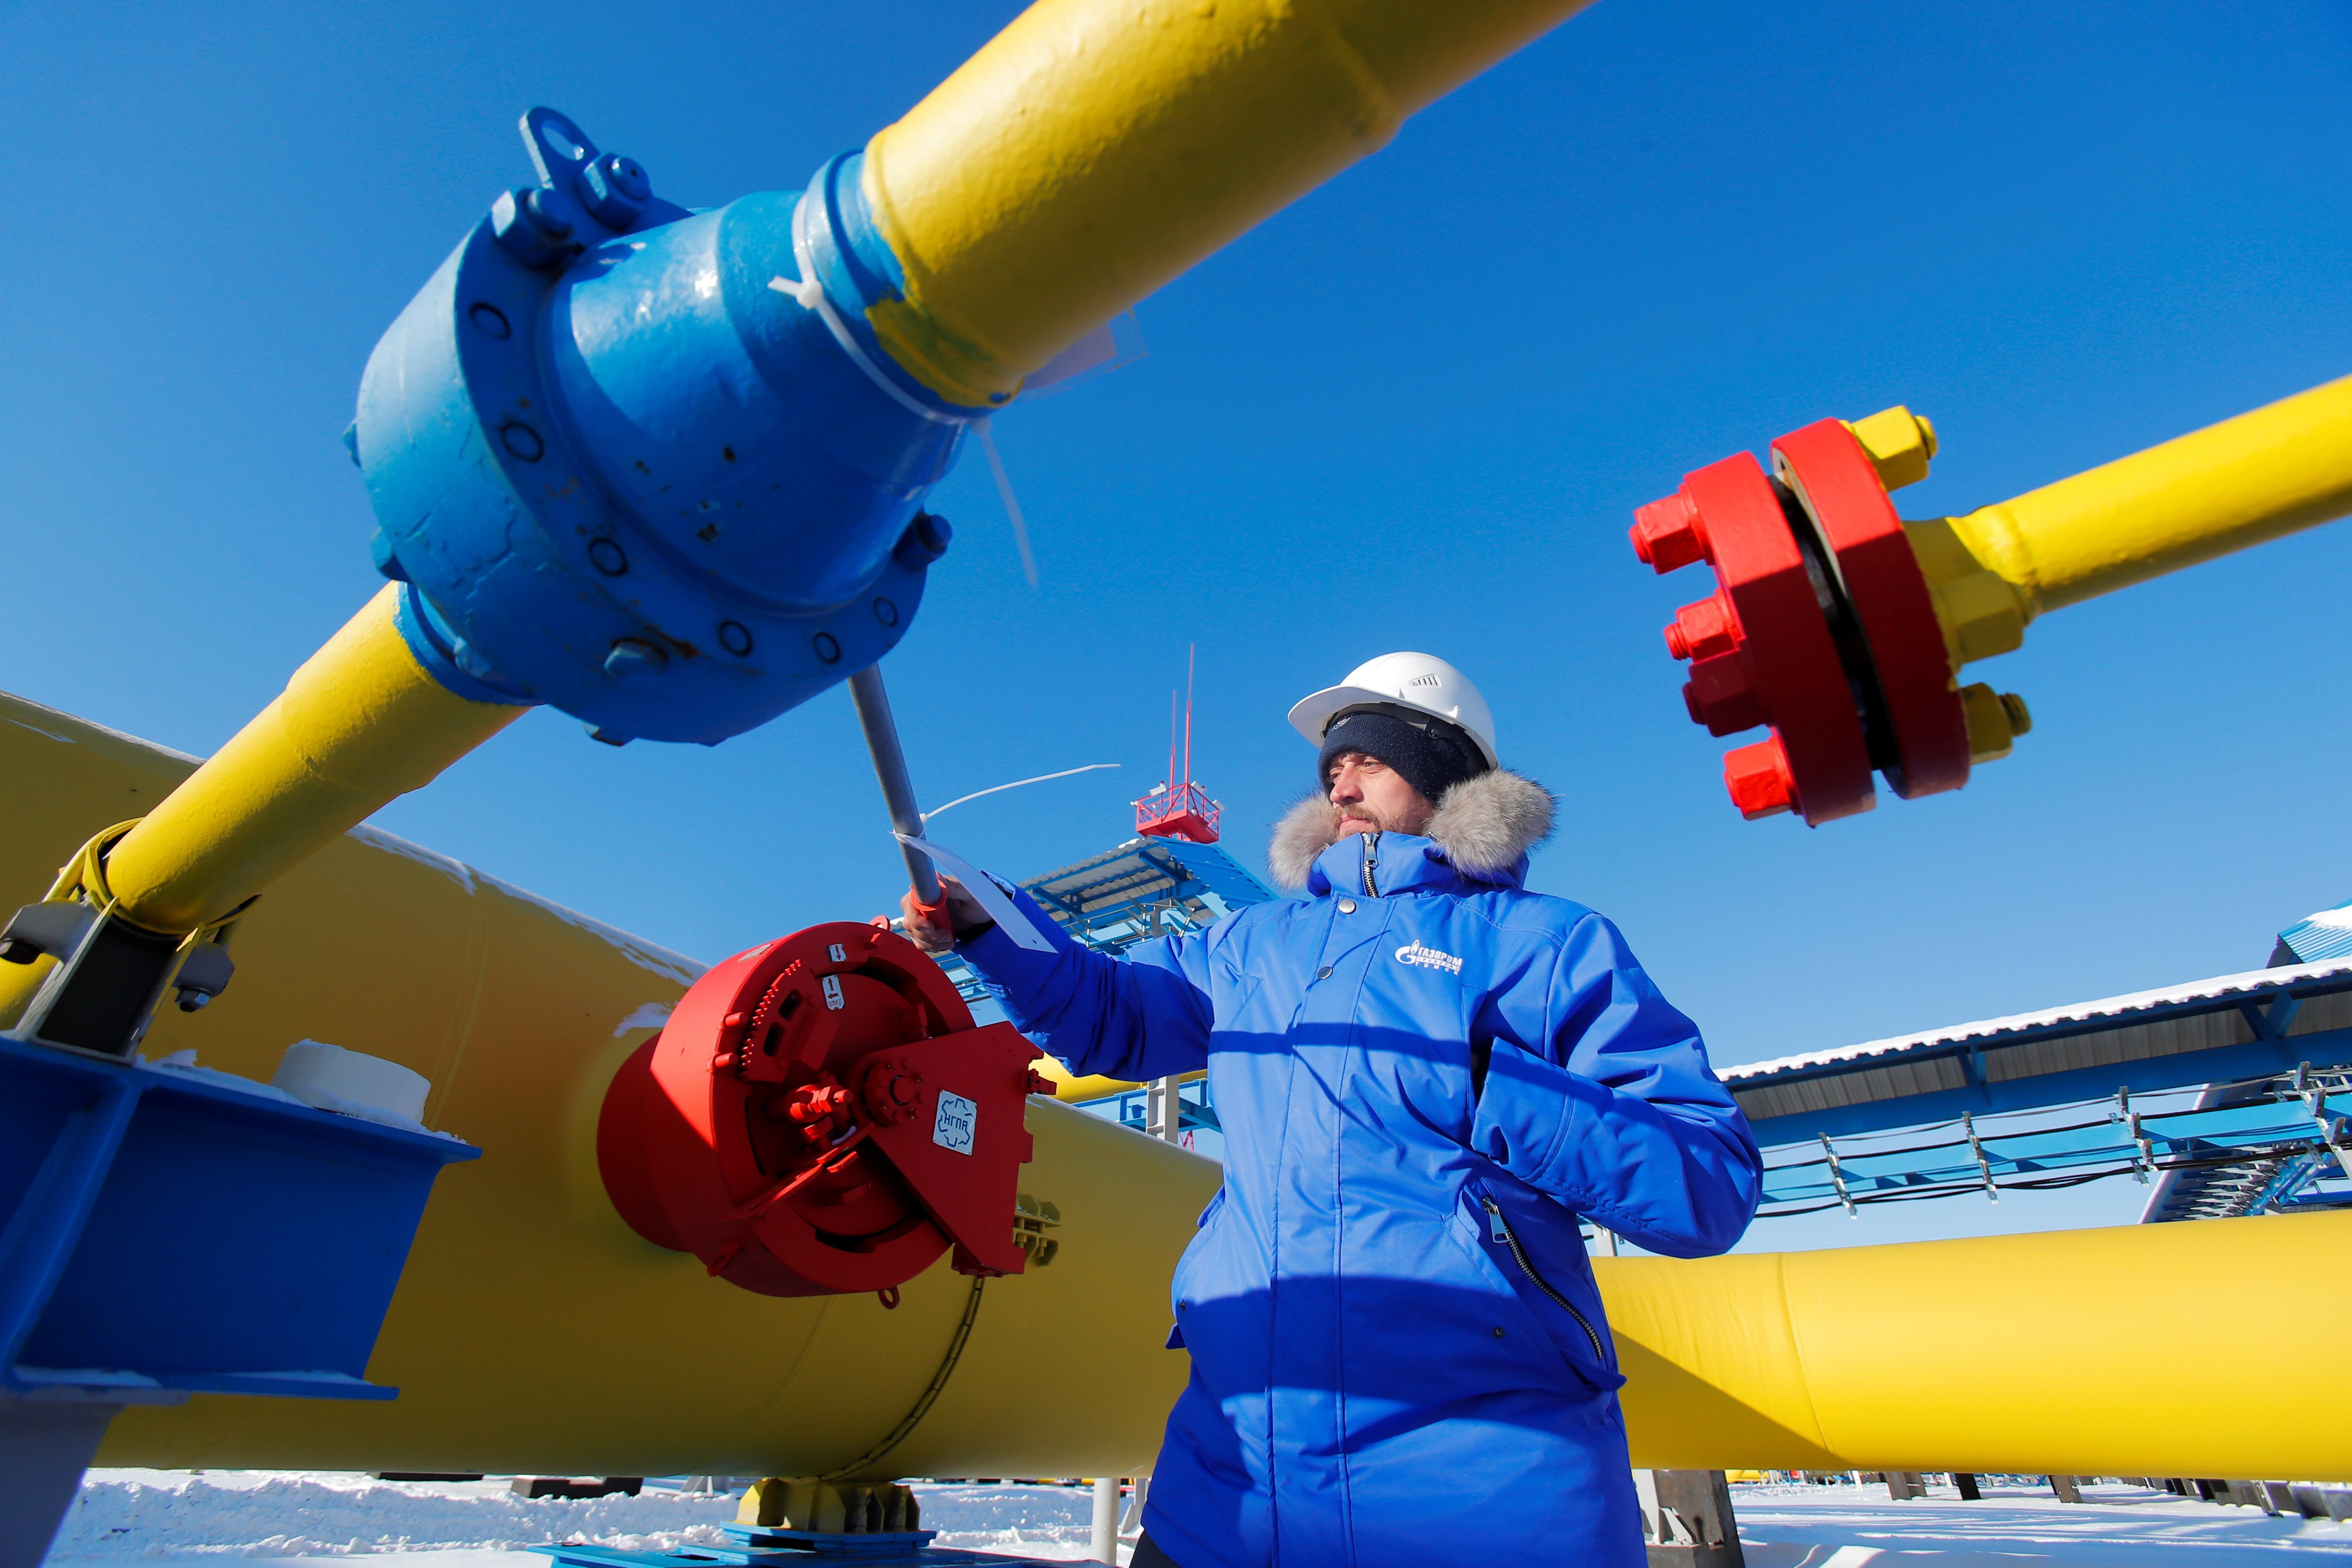 The Power of Siberia 2 pipeline, a major project to transport natural gas from Russia to China, has seen progress stall in recent years. Photo: Reuters